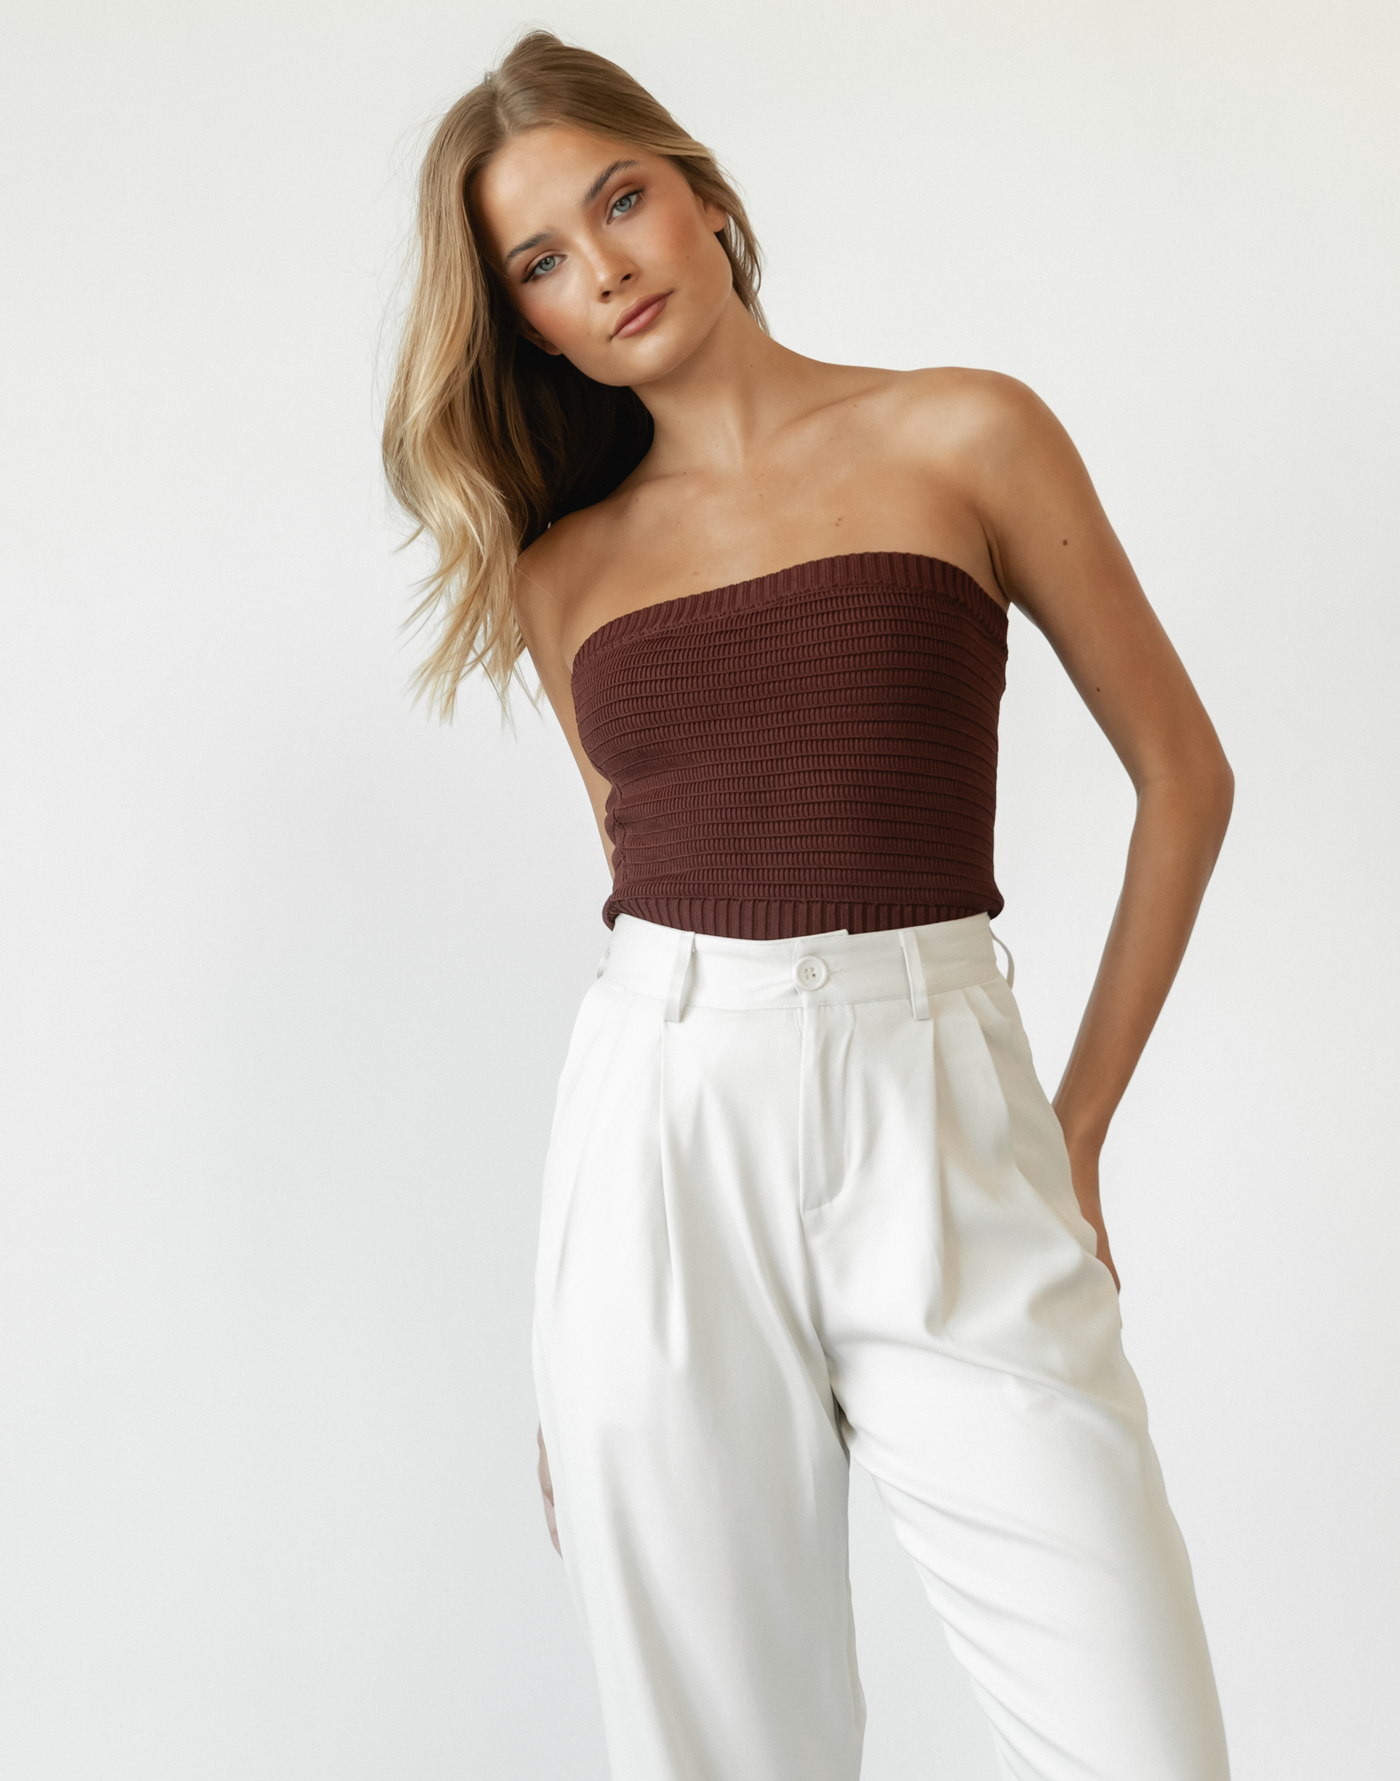 Lytton Strapless Crop Top (Brown) - Ribbed Knit Strapless Top - Women's Top - Charcoal Clothing